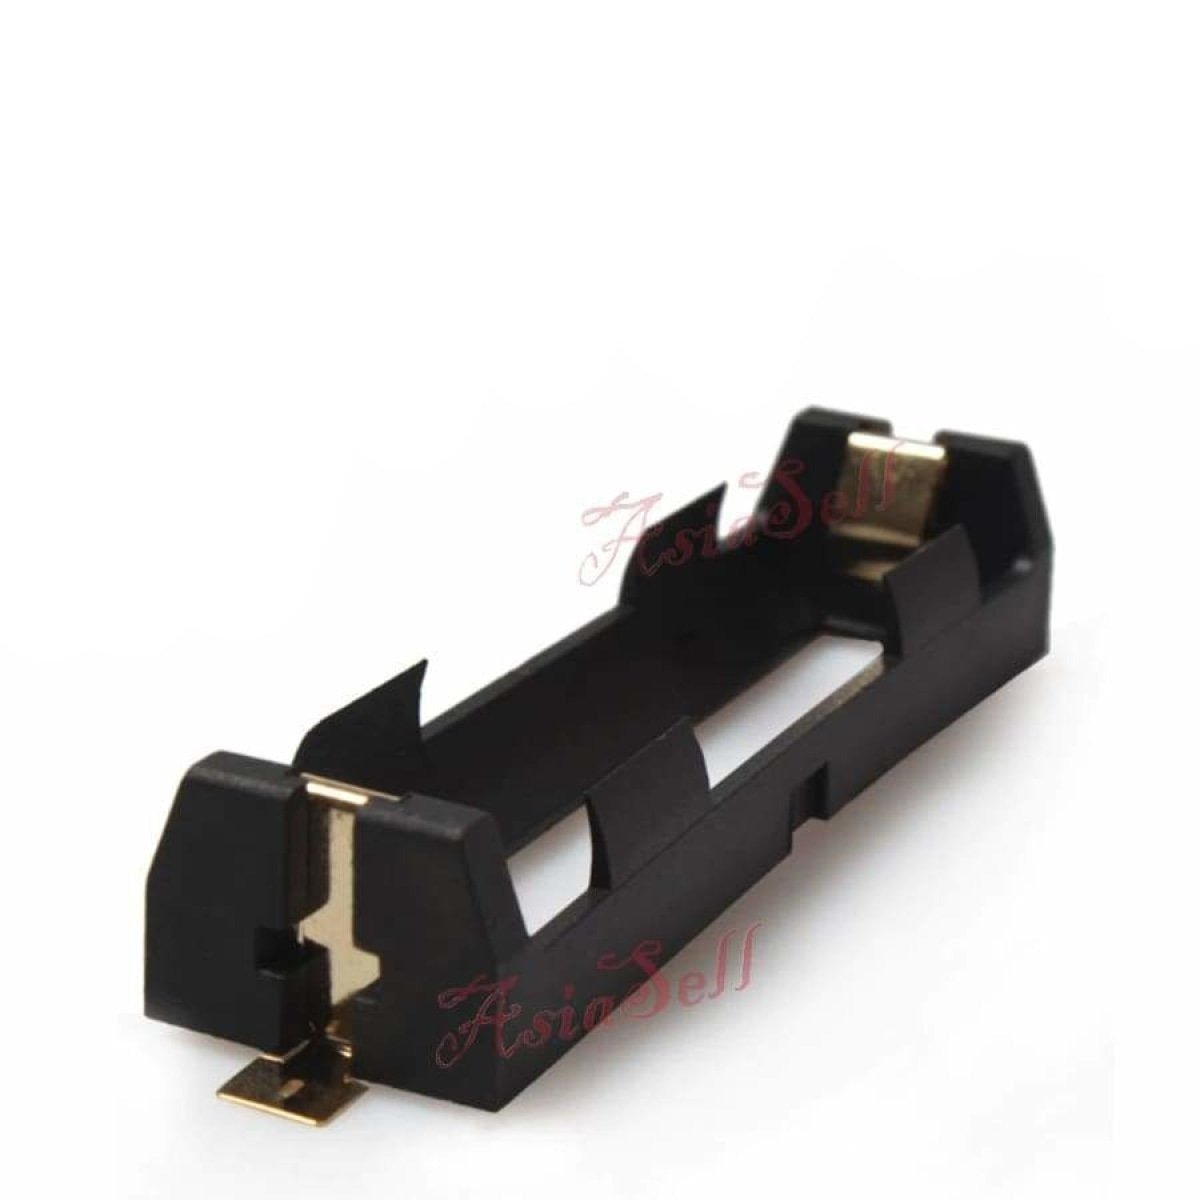 1pcs 1 x 18650 1x18650 Battery Box Holder Case Copper PCB Pins SMD SMT 18650 - Asia Sell